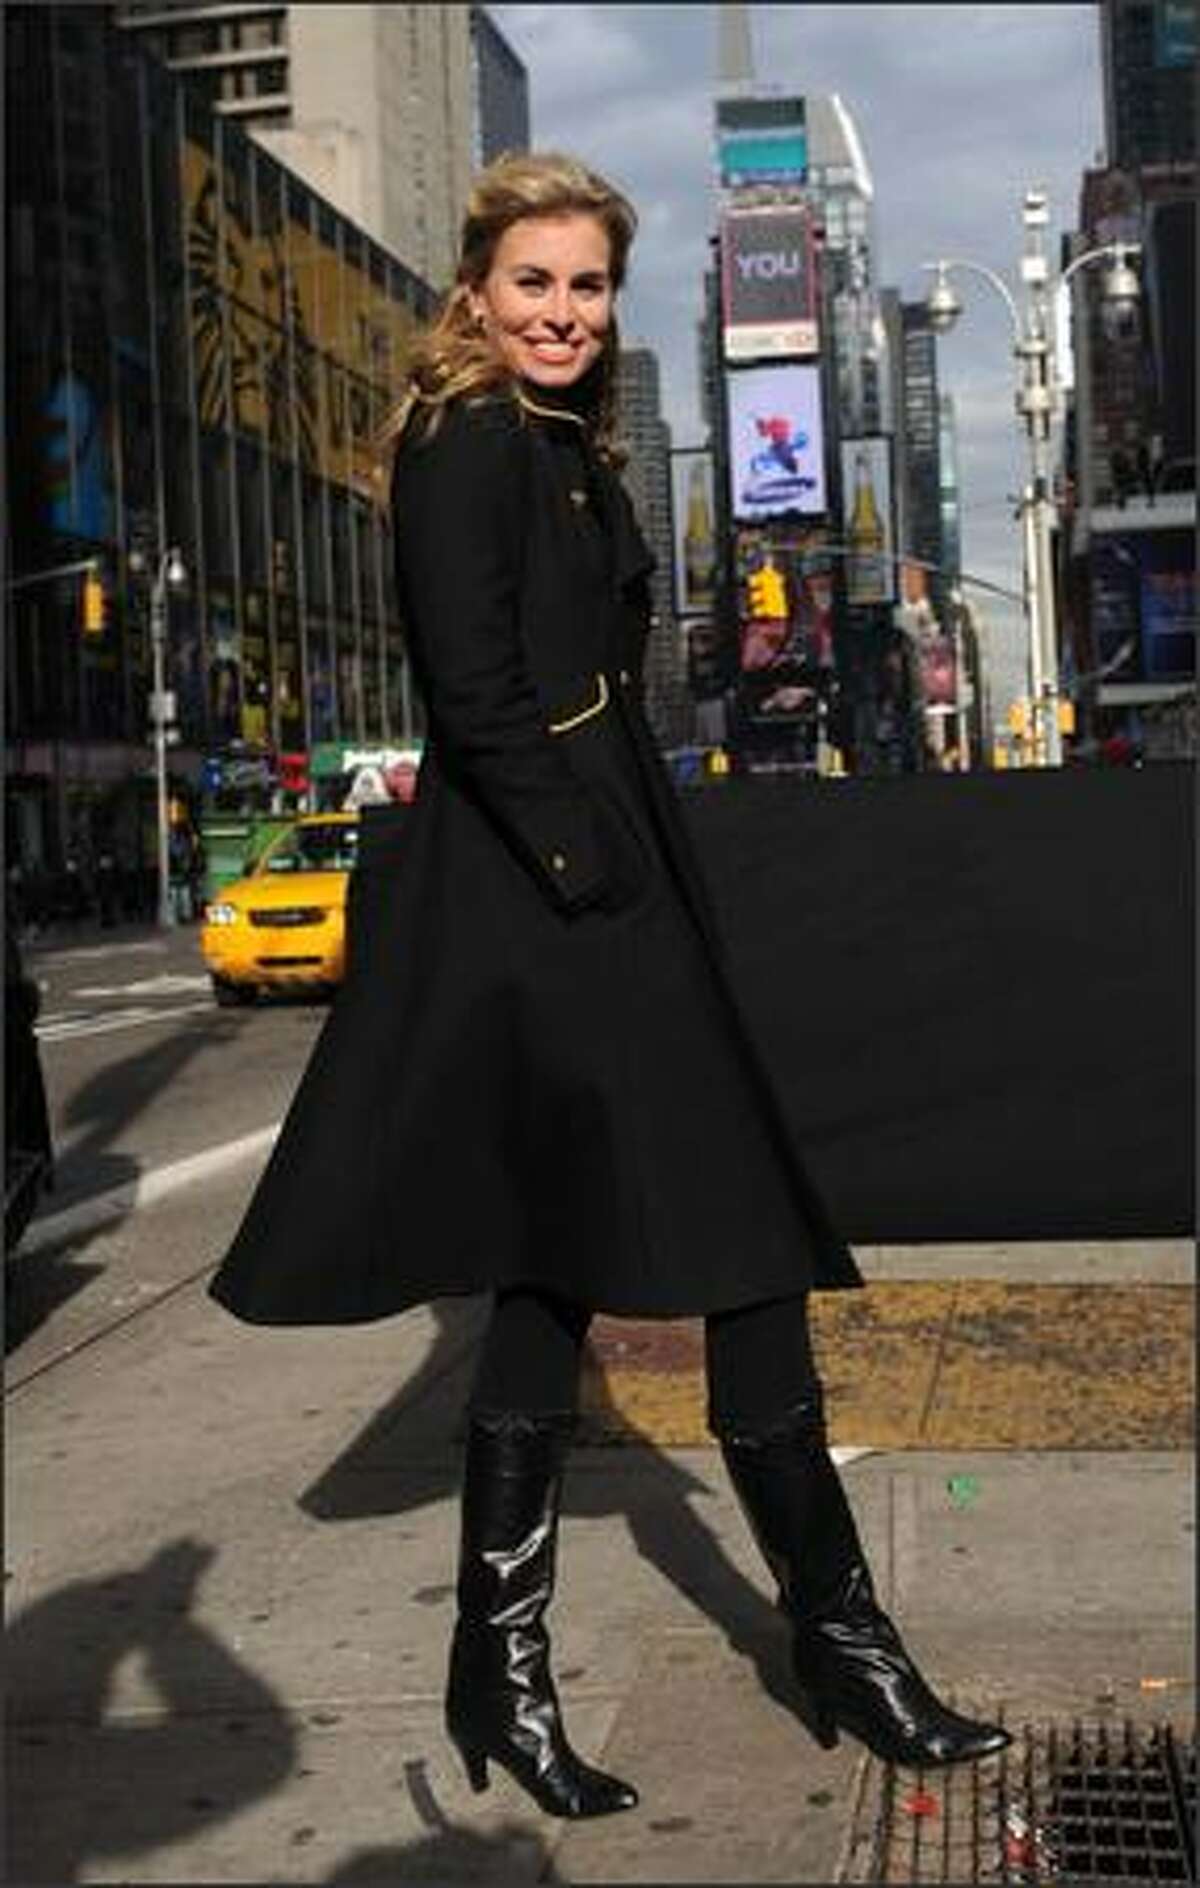 Model Niki Taylor attends a taping of Bravo's new series 'Make Me A Supermodel' in Times Square on Friday in New York City.